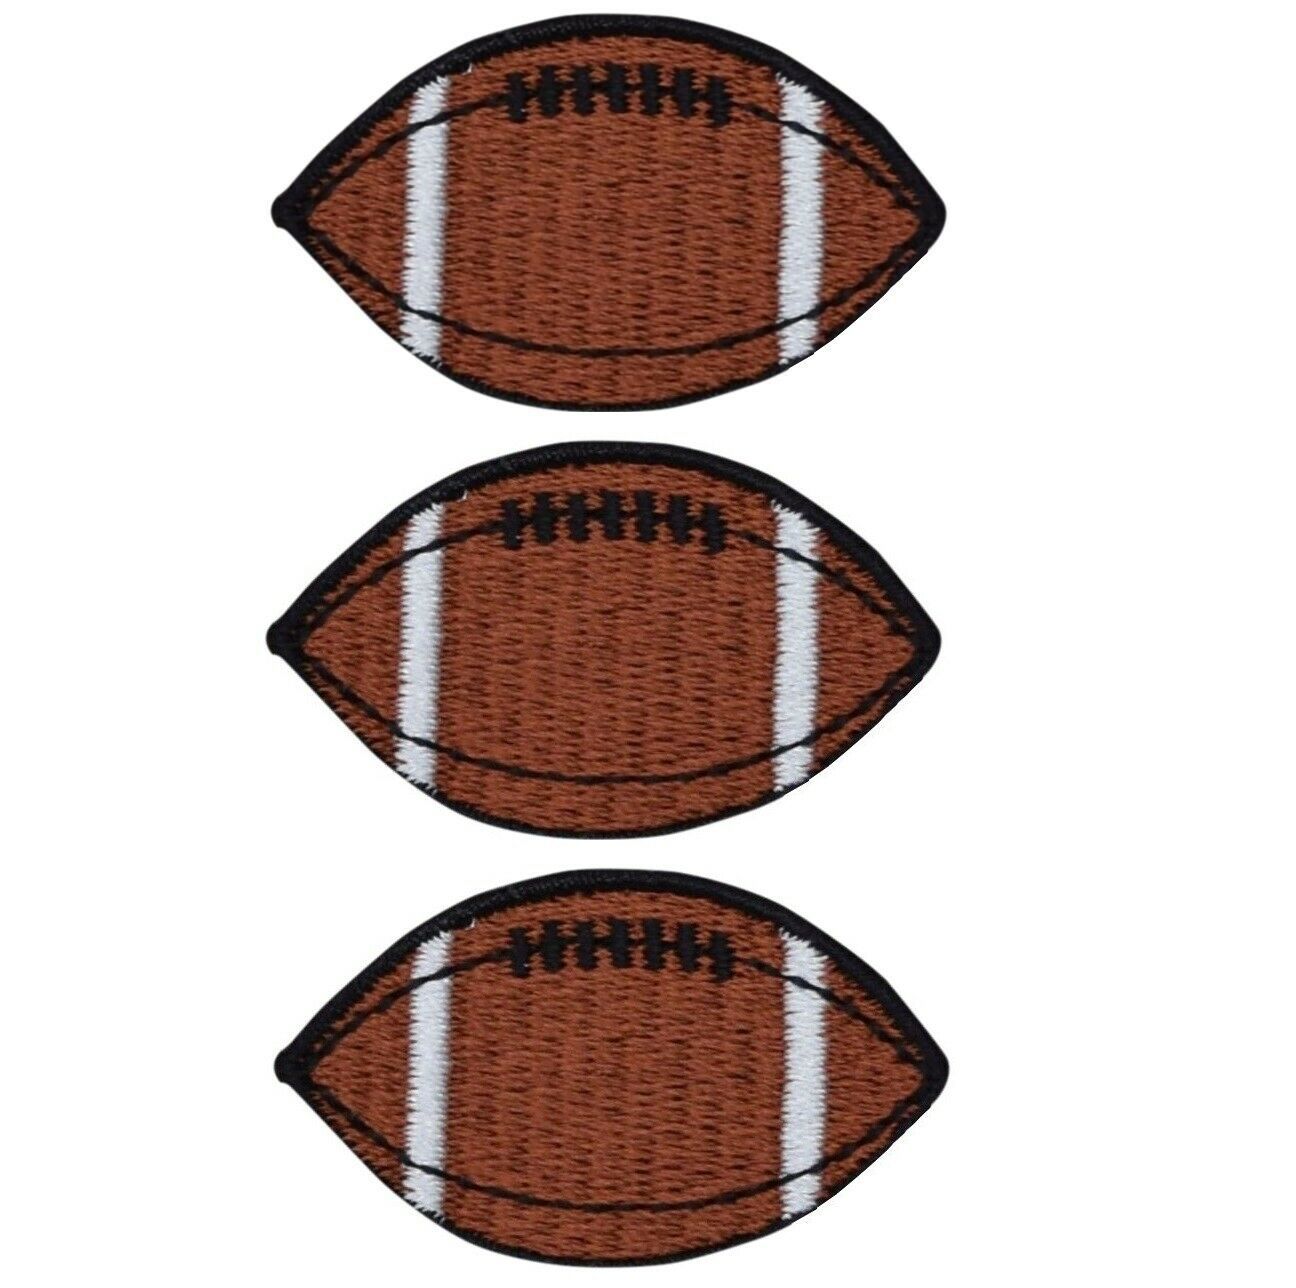 Football Applique Patch - Sports Badge 1-5/8 (3-Pack, Iron on)